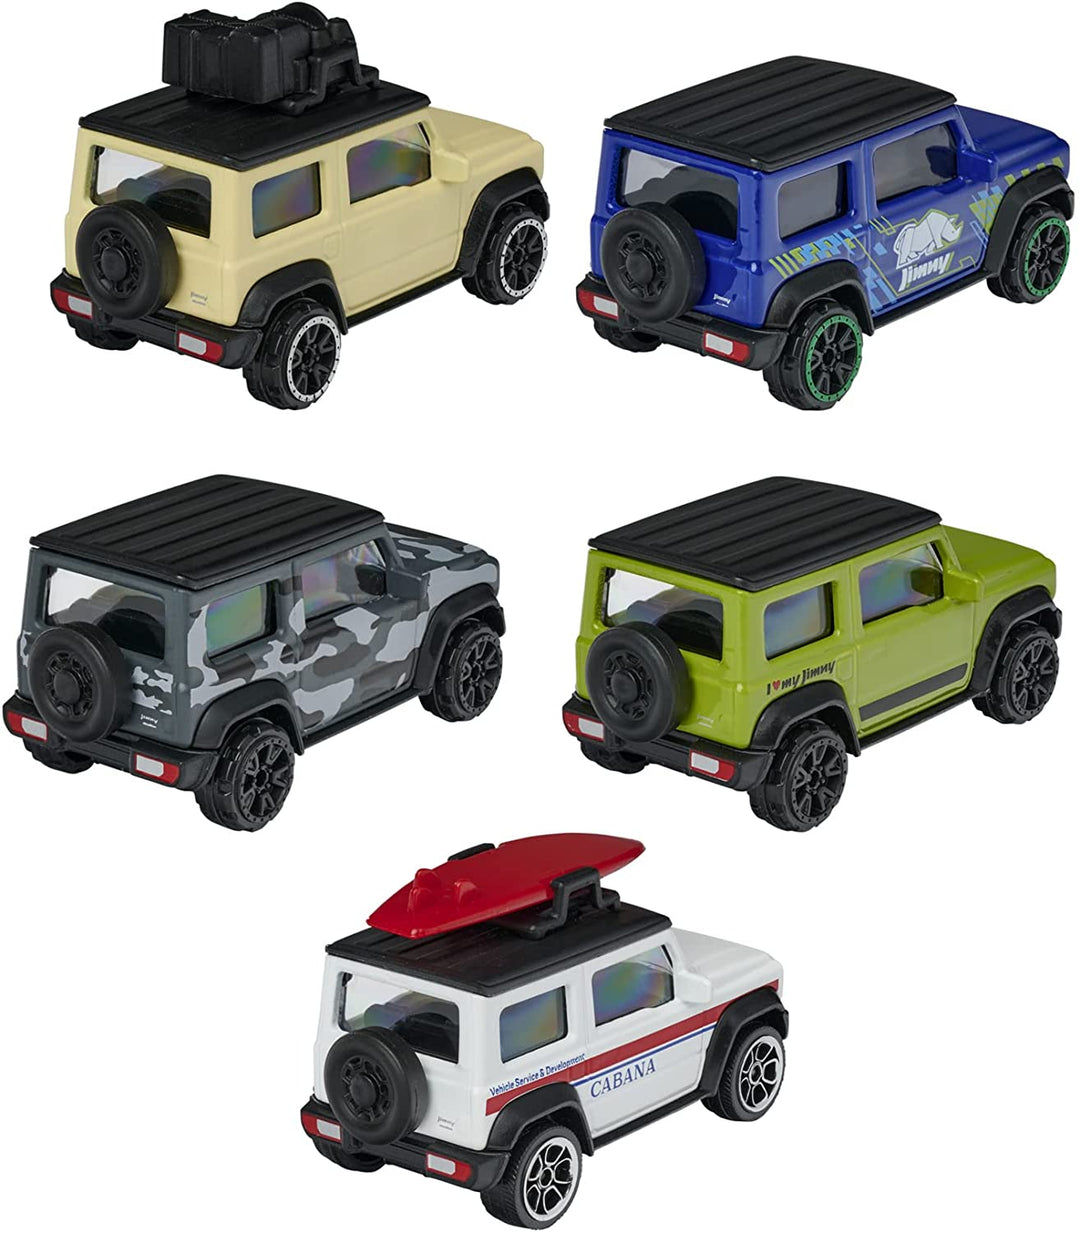 Majorette 212053177 Suzuki Jimny Gift Set – Set of 5 SUV Models Metal Toy Cars Off-Road for Girls and Boys